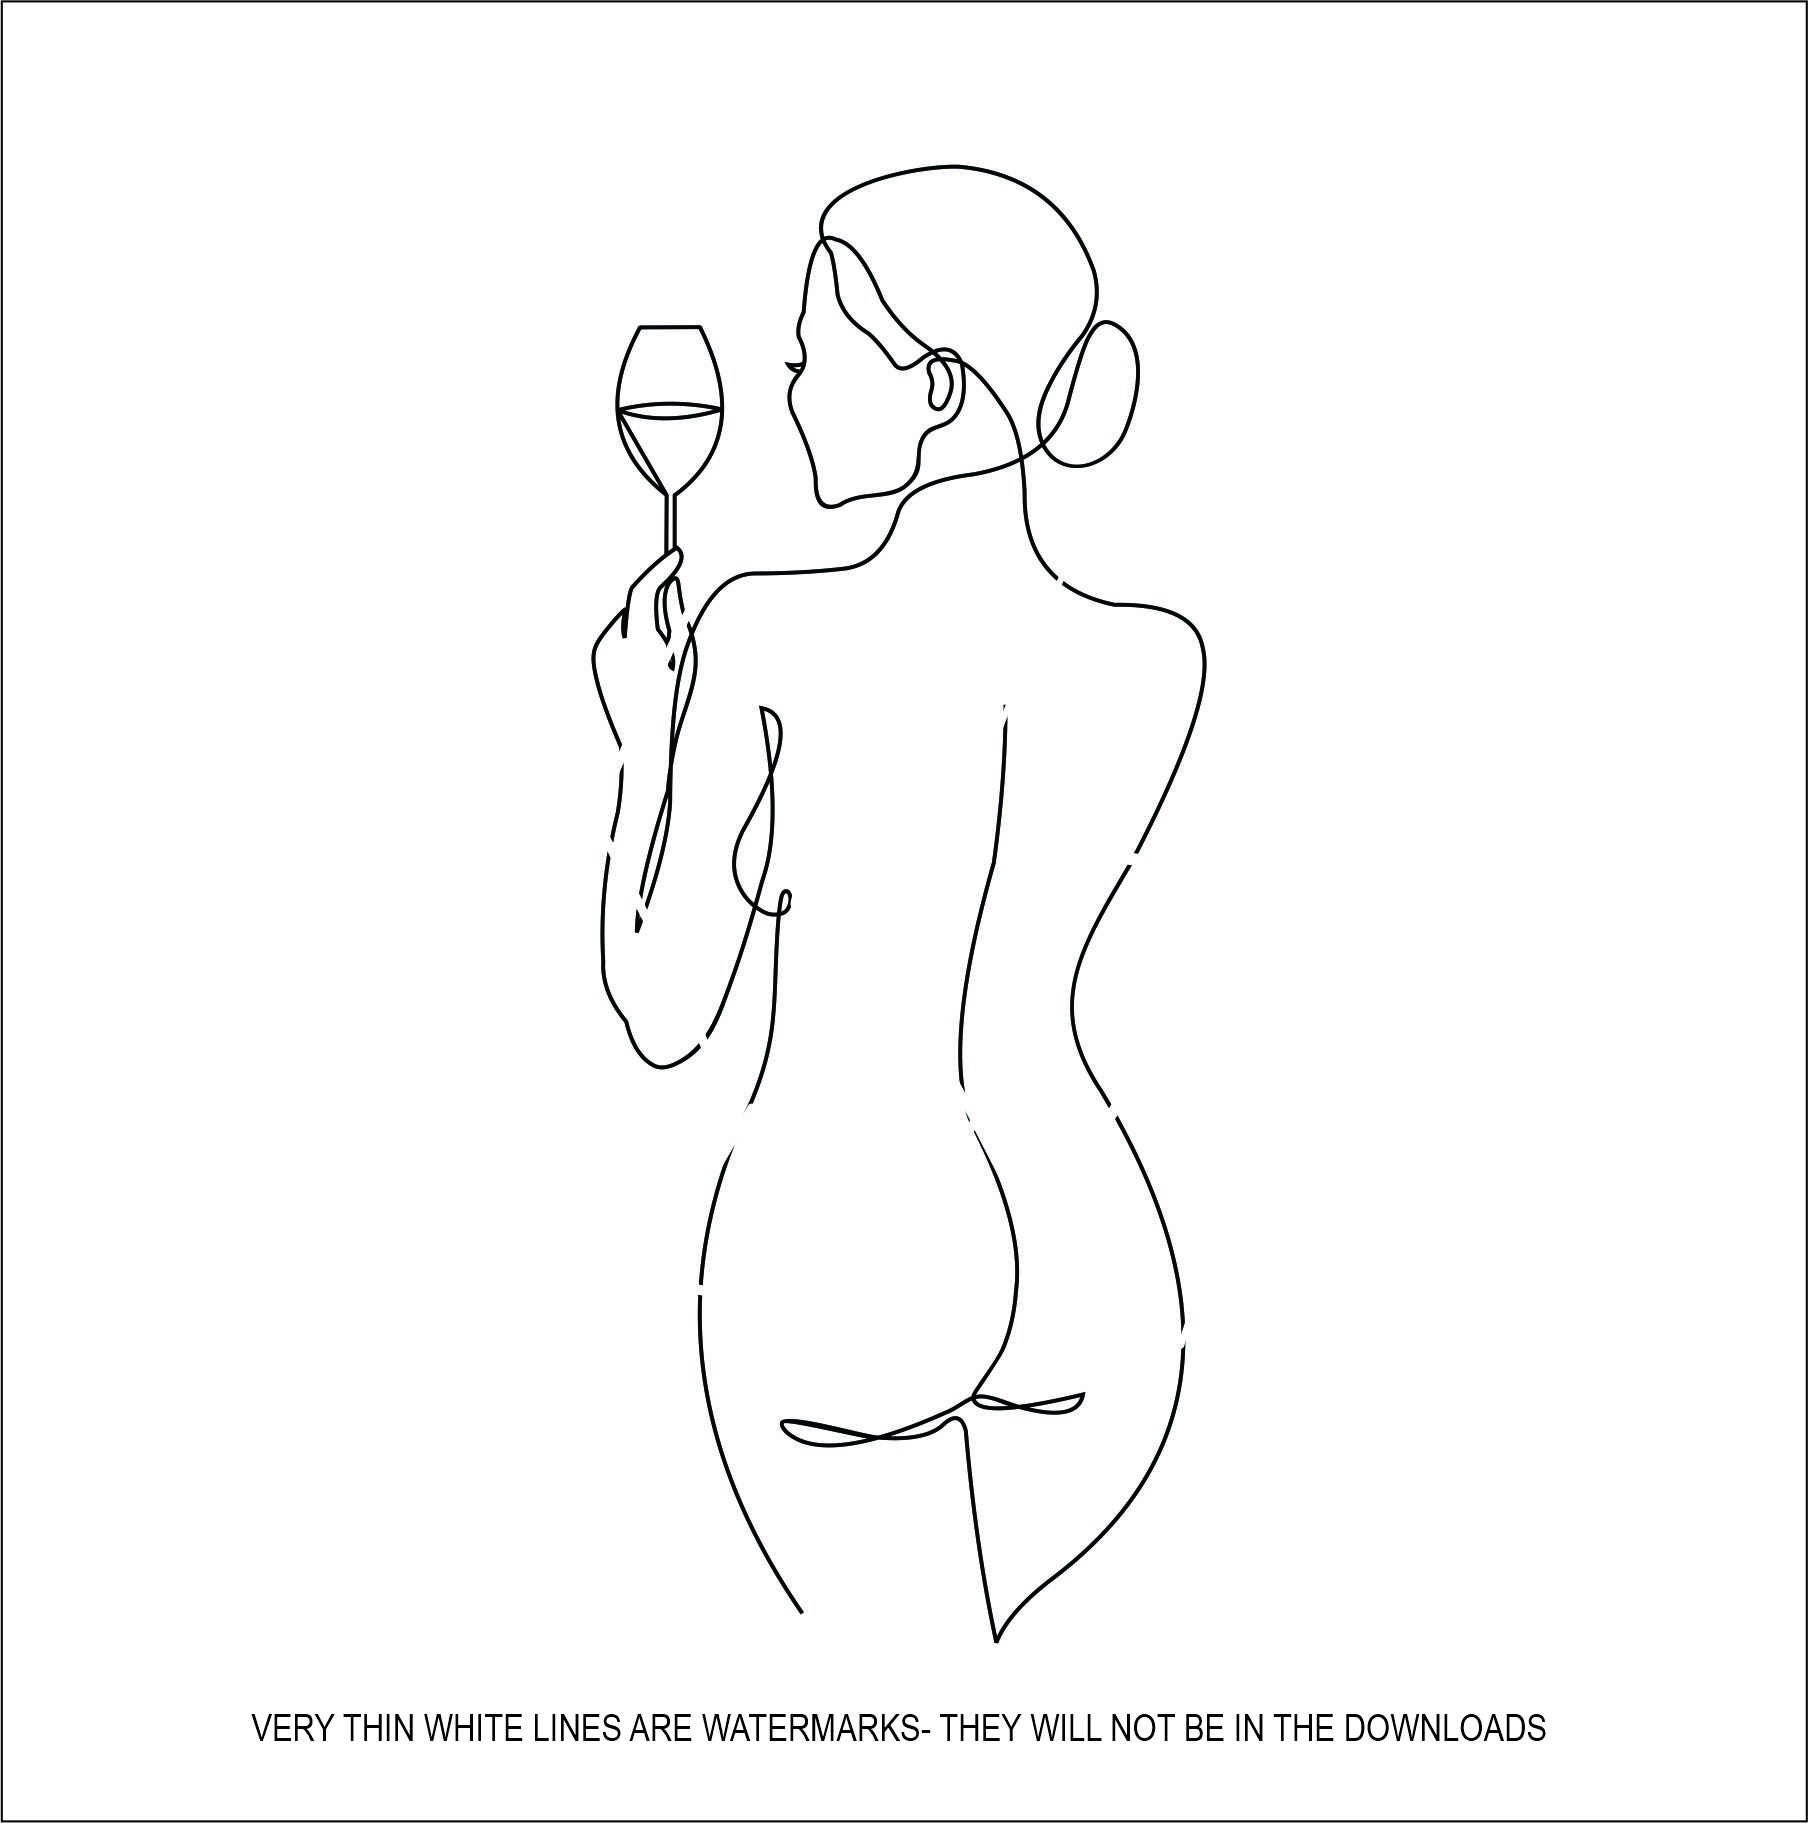 French Cuff Women Porn - Sexy Backside Nude Lady Woman Wine Glass Outline Hot Beauty - Etsy Canada